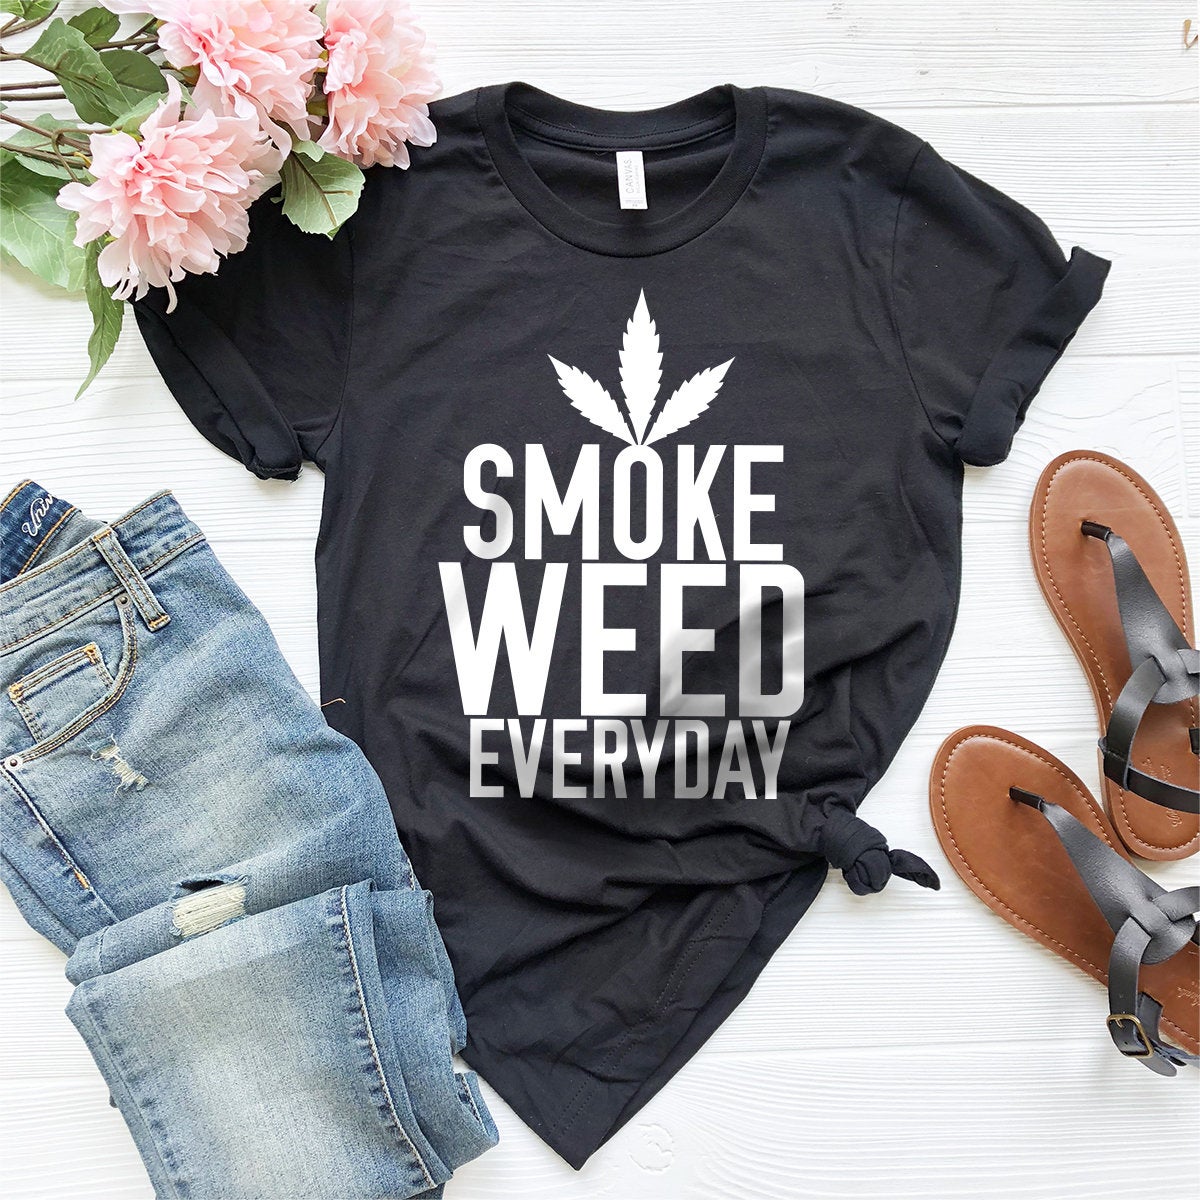 Reel Cool Fathers Day Fishing Dope Dad Weed Marijuana Stoner Comfort Colors  T-Shirt